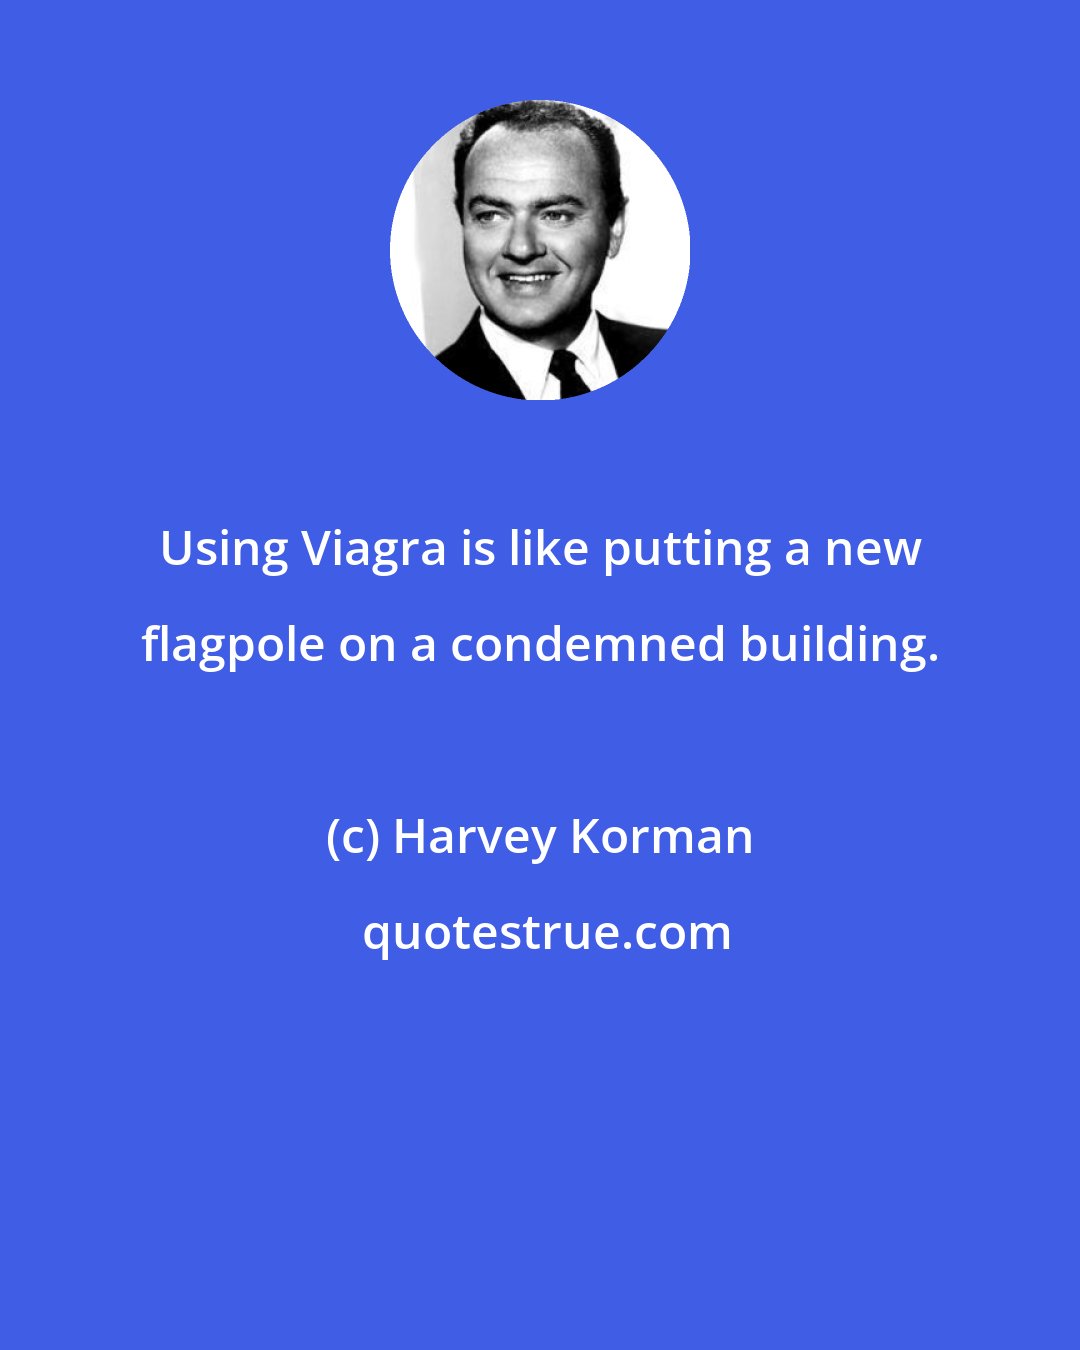 Harvey Korman: Using Viagra is like putting a new flagpole on a condemned building.